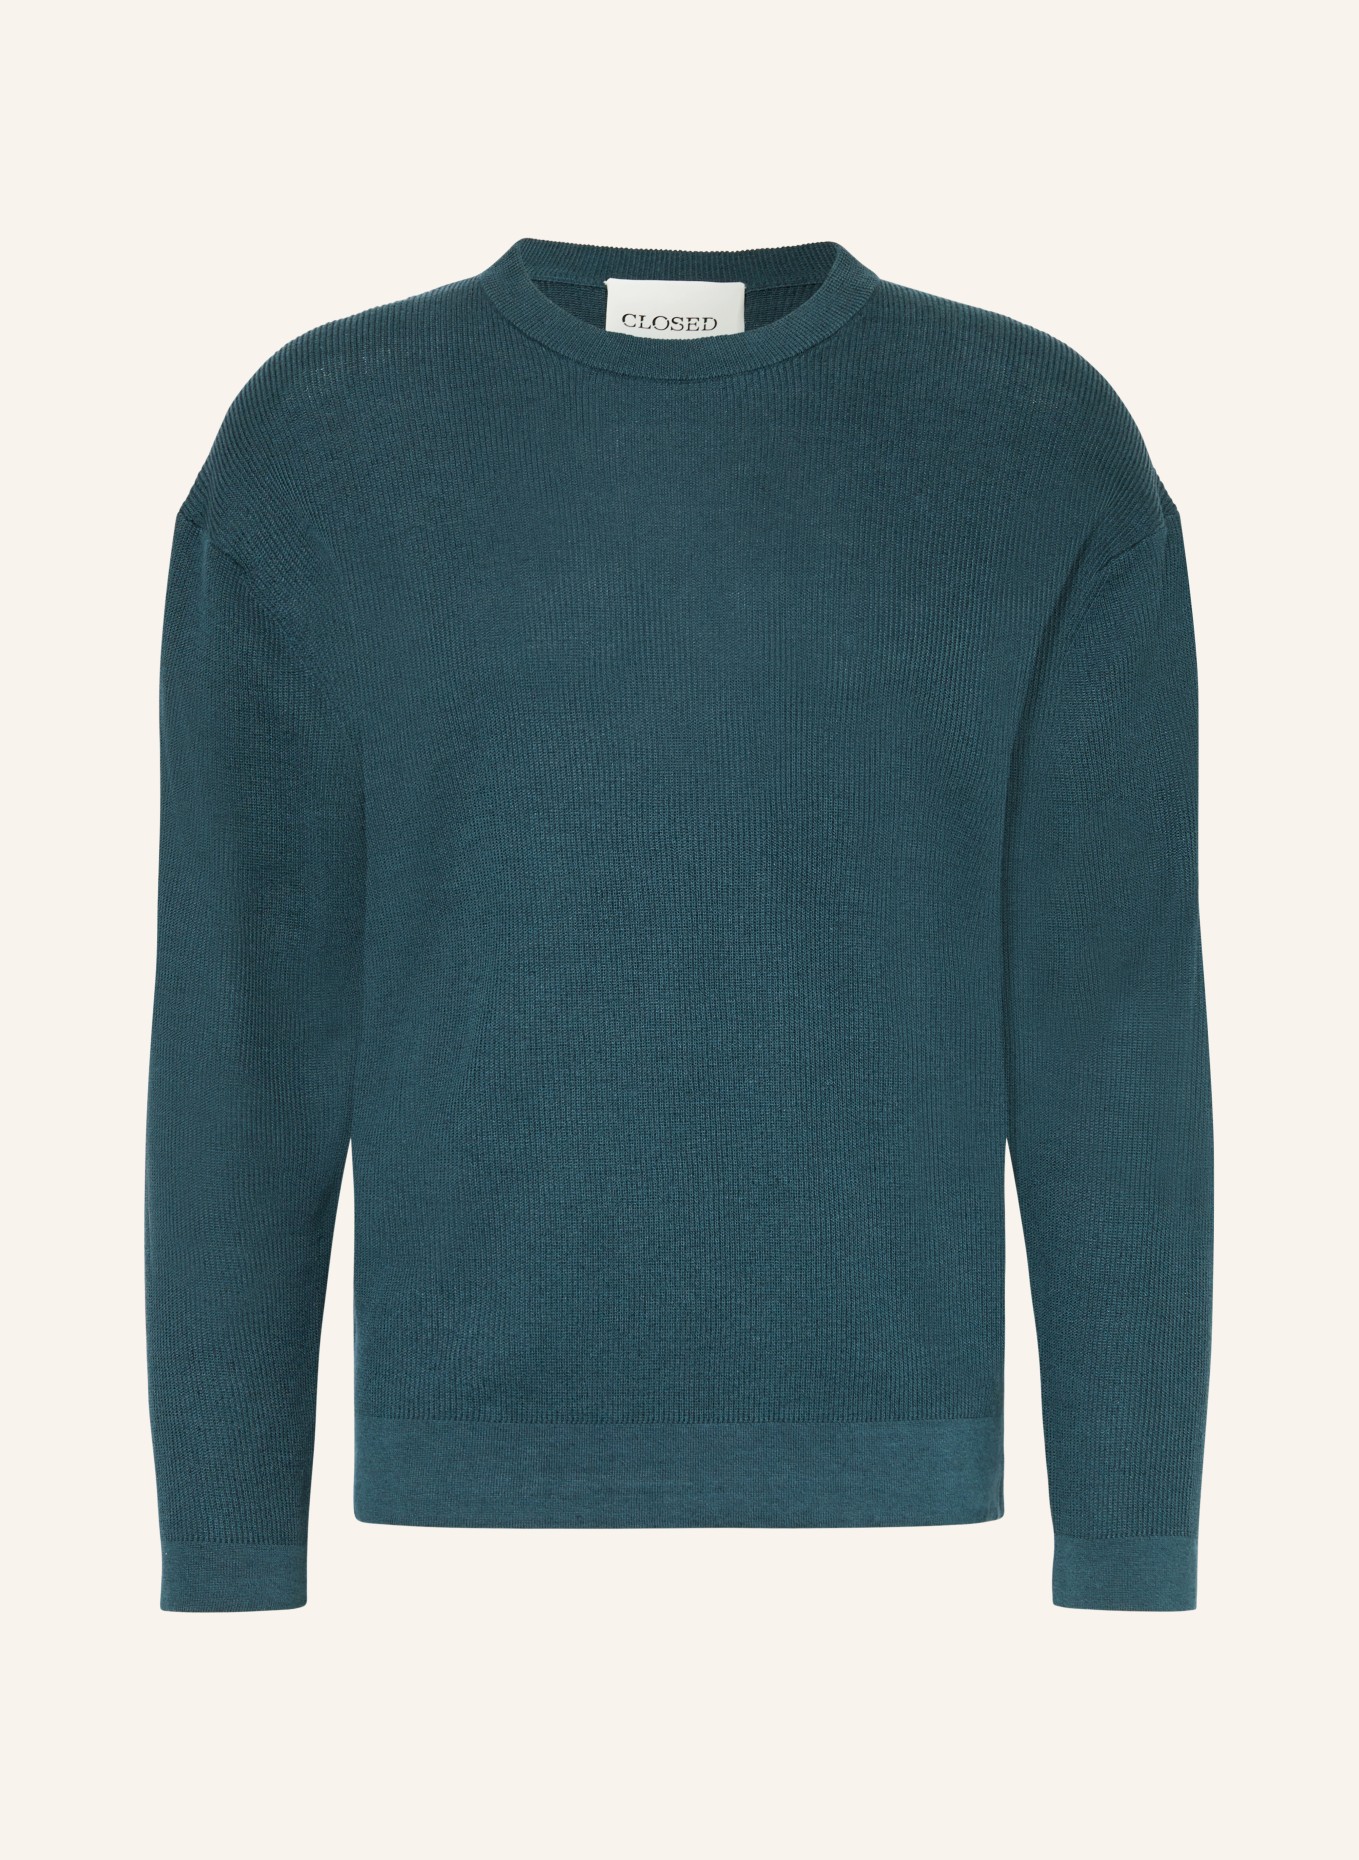 CLOSED Sweater, Color: TEAL (Image 1)